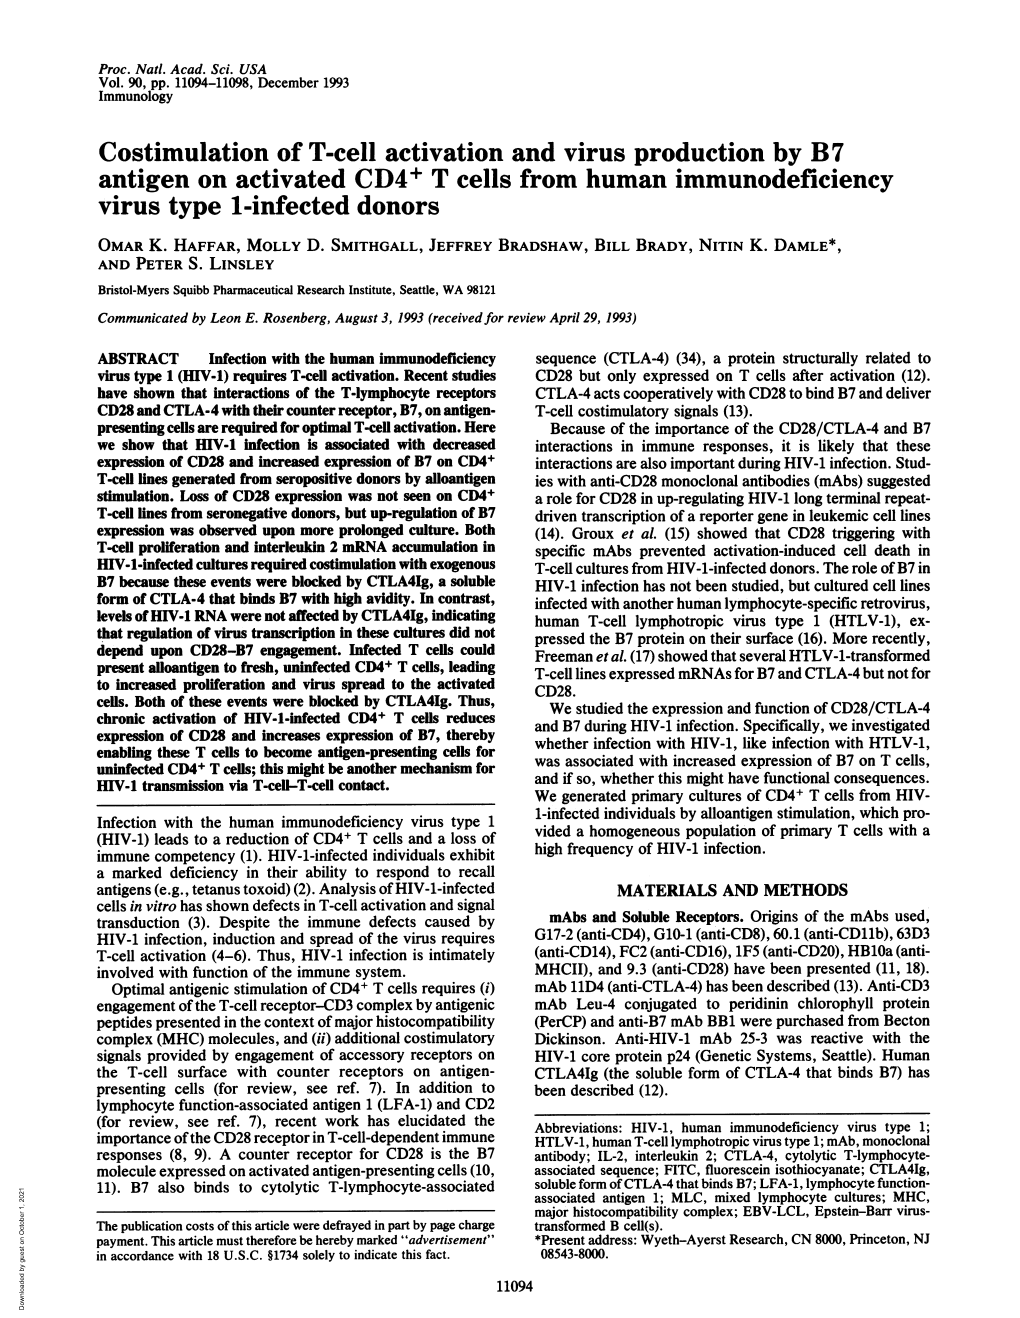 Costimulation of T-Cell Activation and Virus Production by B7 Antigen on Activated CD4+ T Cells from Human Immunodeficiency Virus Type 1-Infected Donors OMAR K